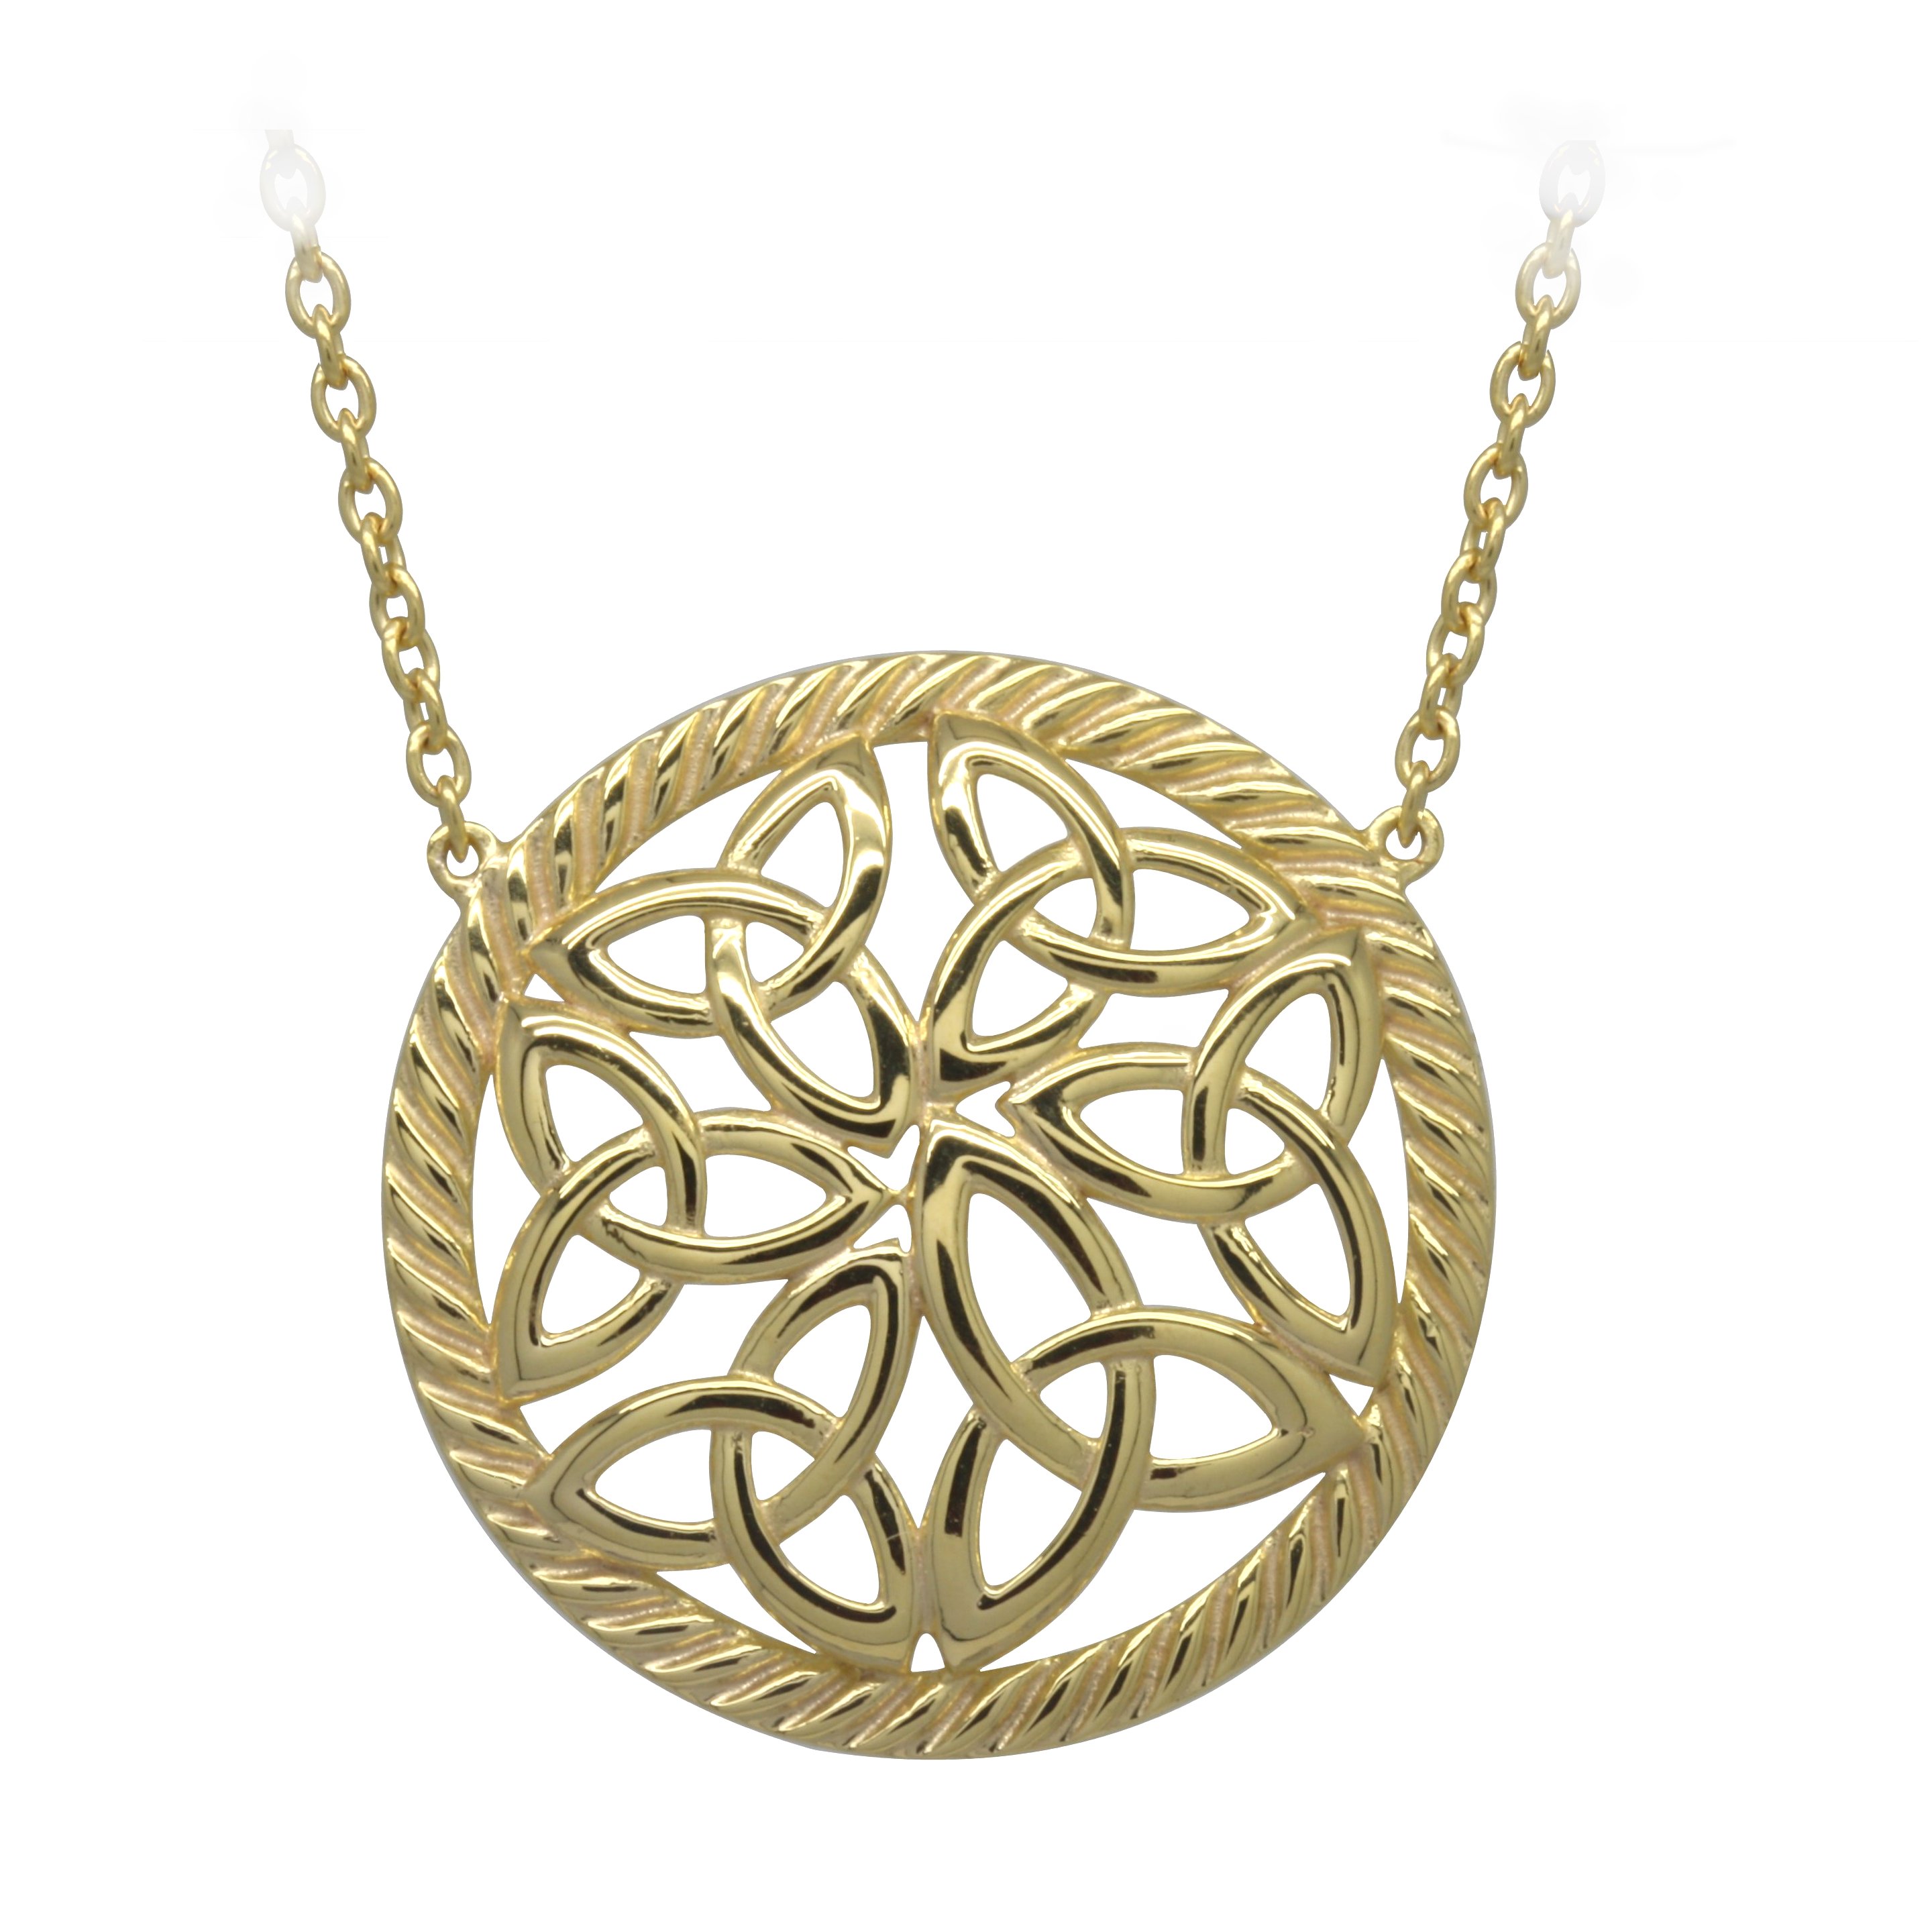 Product image for Irish Necklace | Gold Plated Sterling Silver Trinity Knot Round Pendant